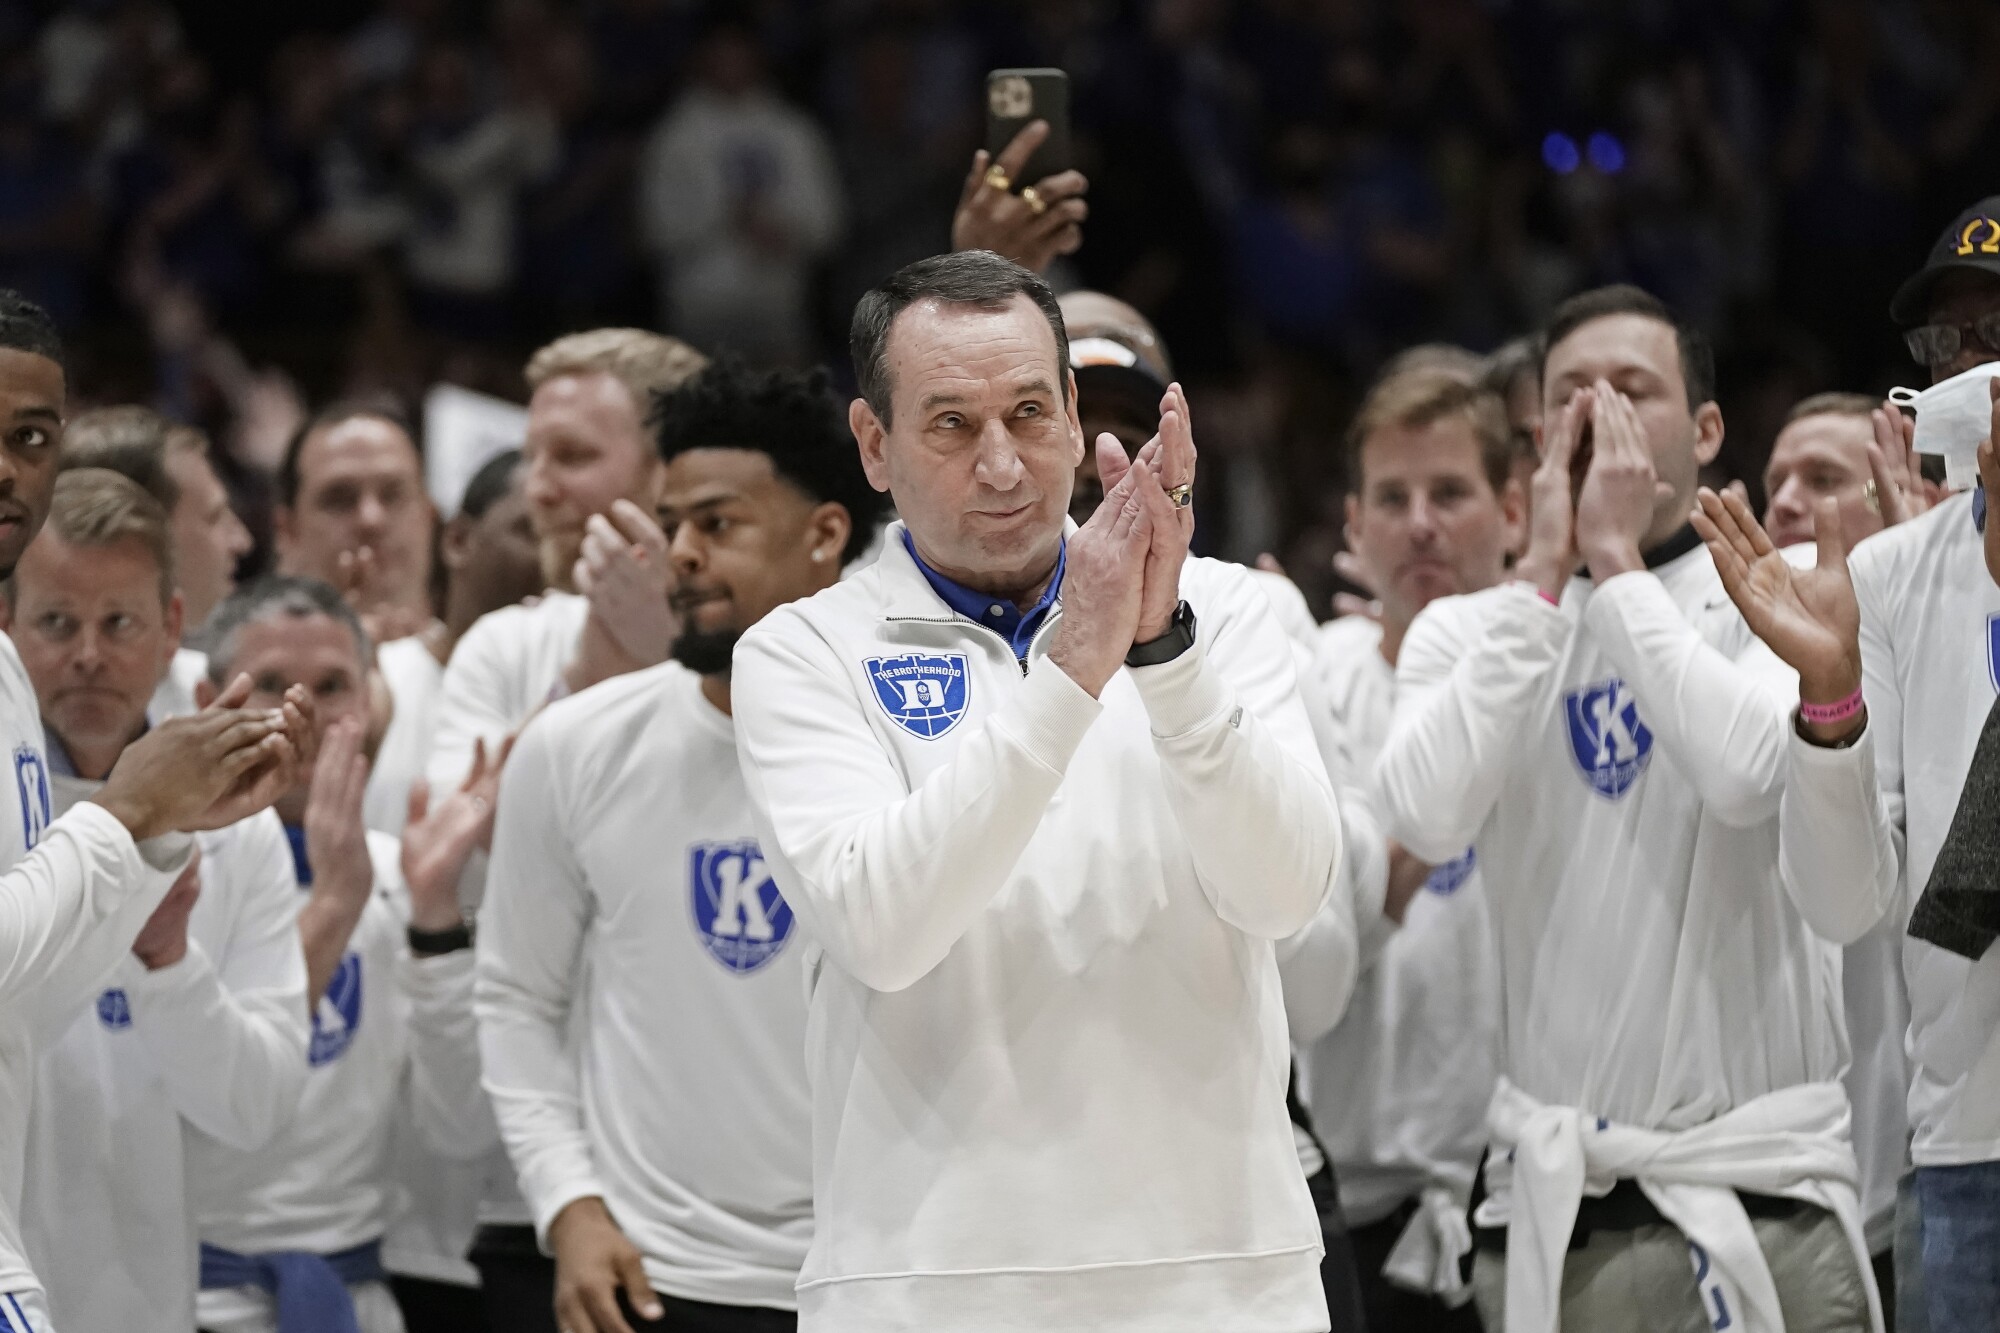 Duke coach Mike Krzyzewski applauds while being recognized before Sunday's game against North Carolina.